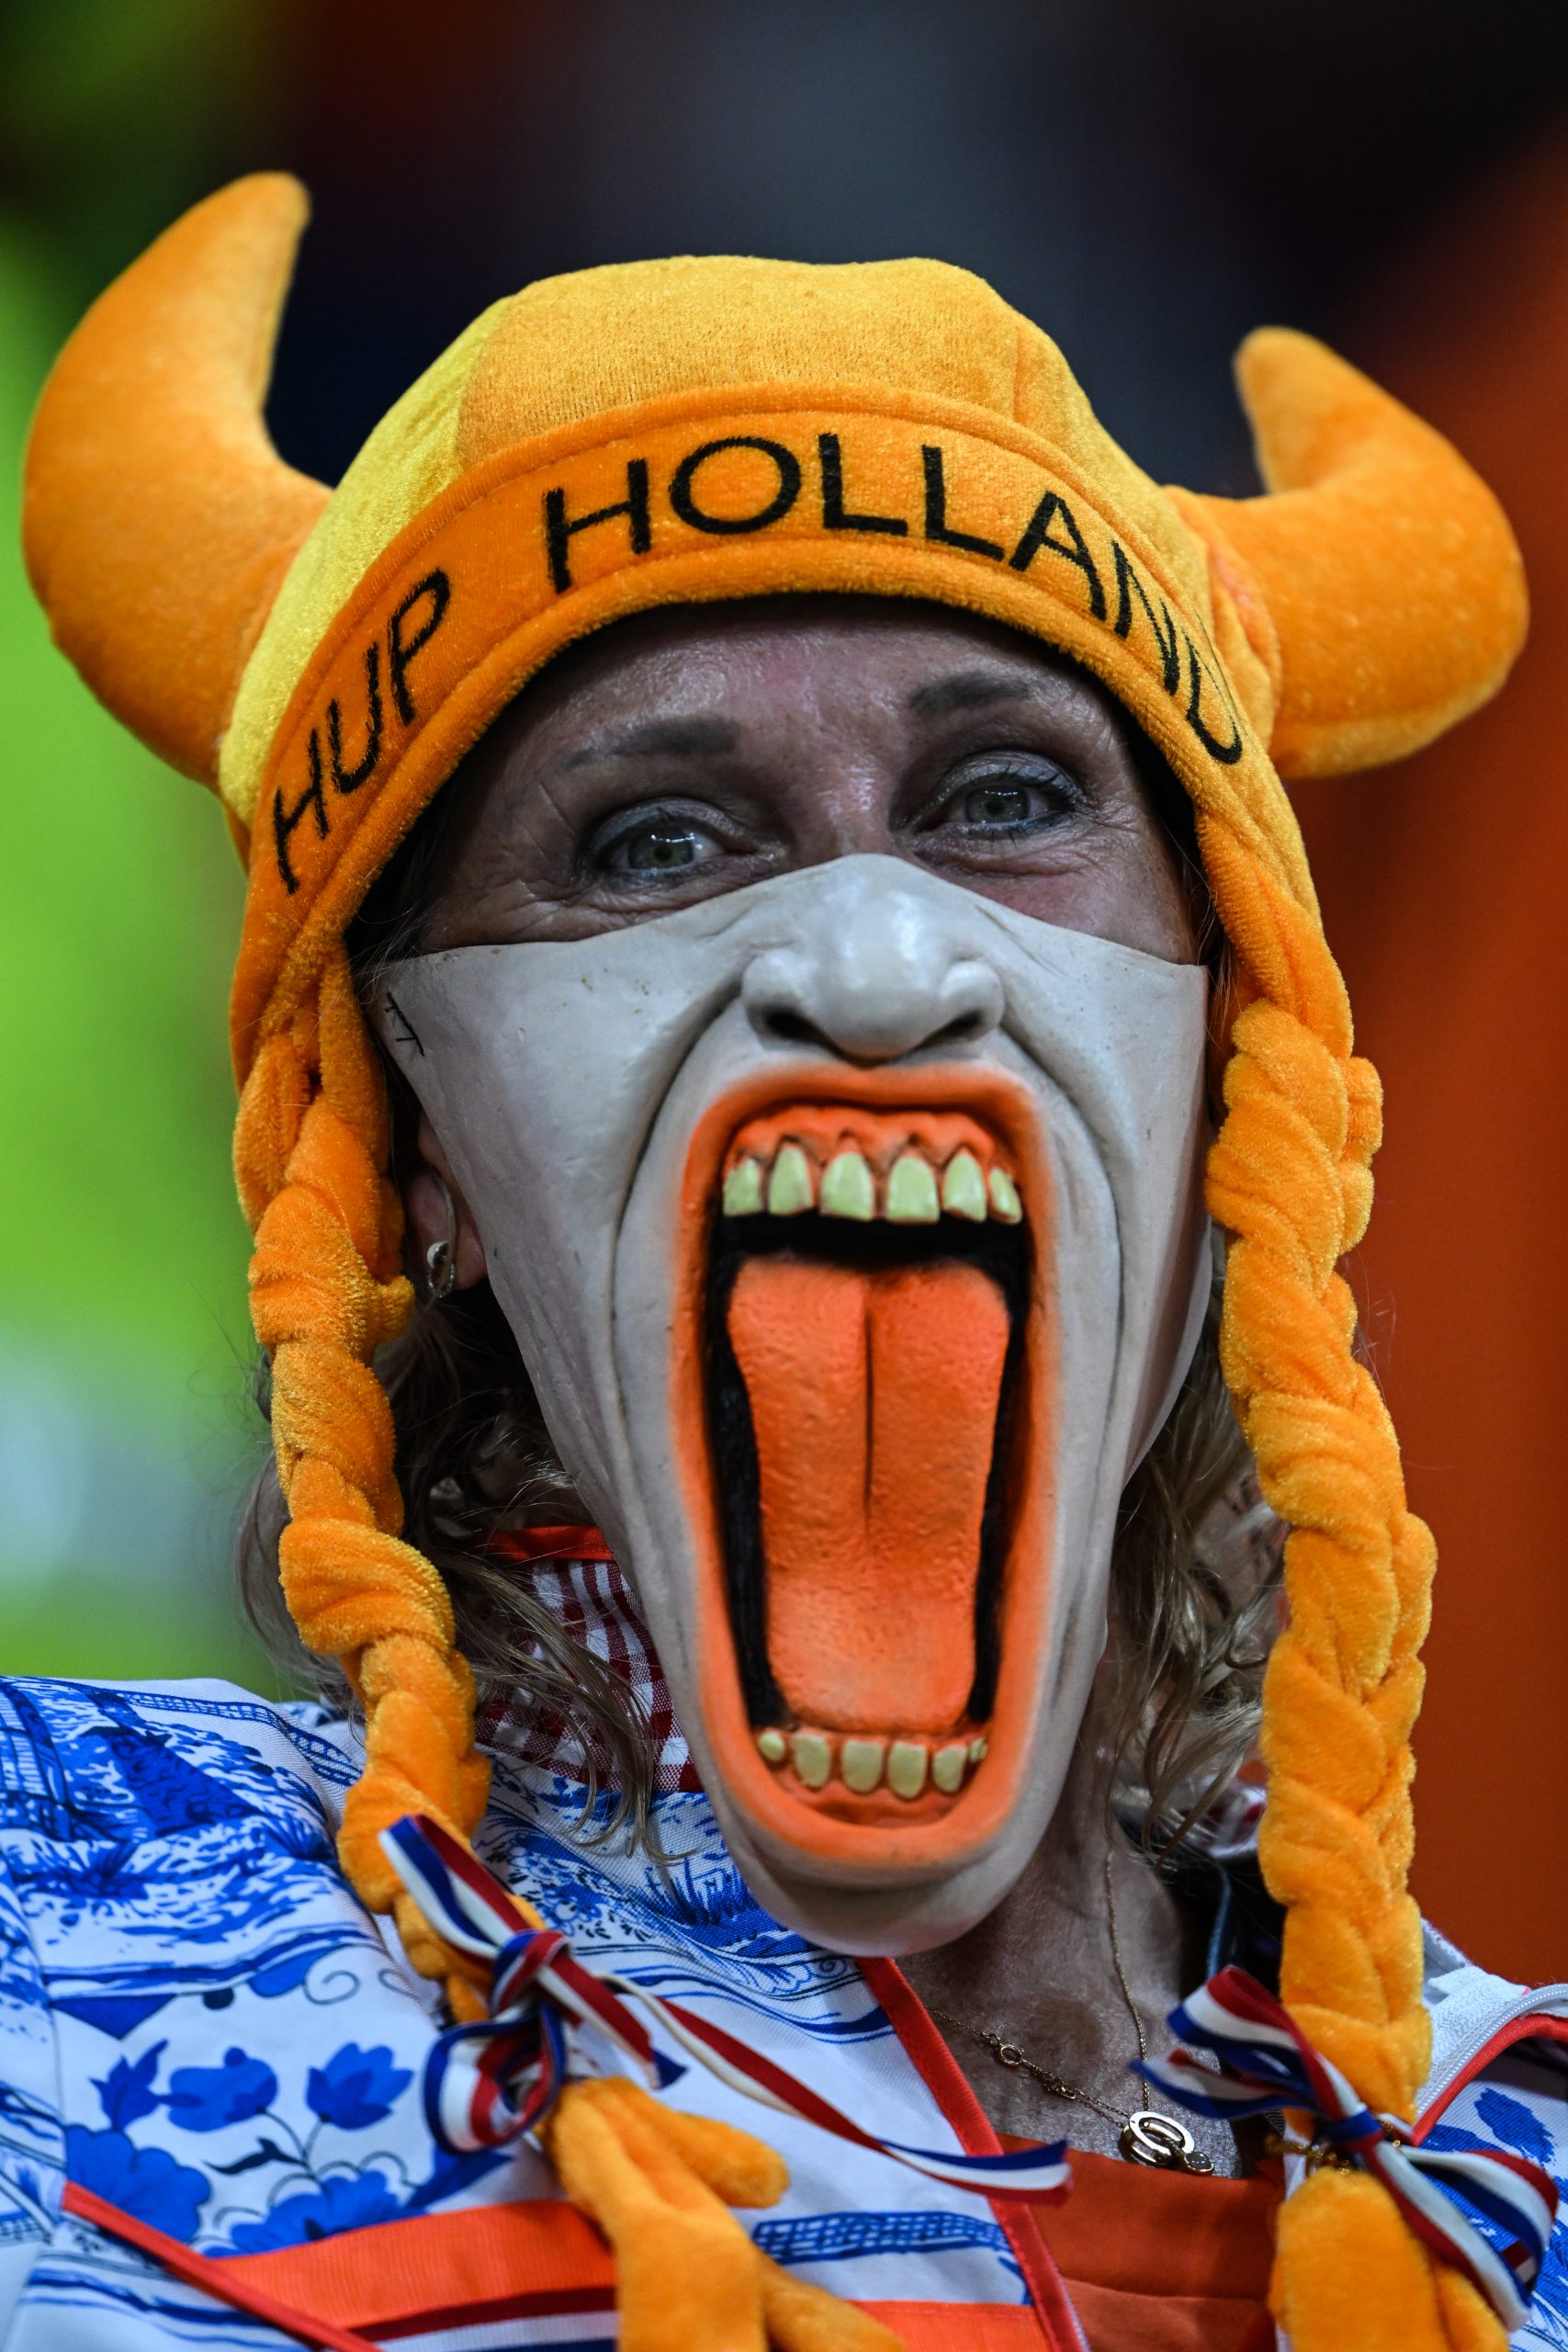 29 November 2022, Qatar, Al Khor: A costumed fan from the Netherlands is seen in teh stands prior to the start of the the FIFA World Cup Qatar 2022 Group A soccer match between the Netherlands and Qatar at Al Bayt Stadium. Photo: Robert Michael/dpa